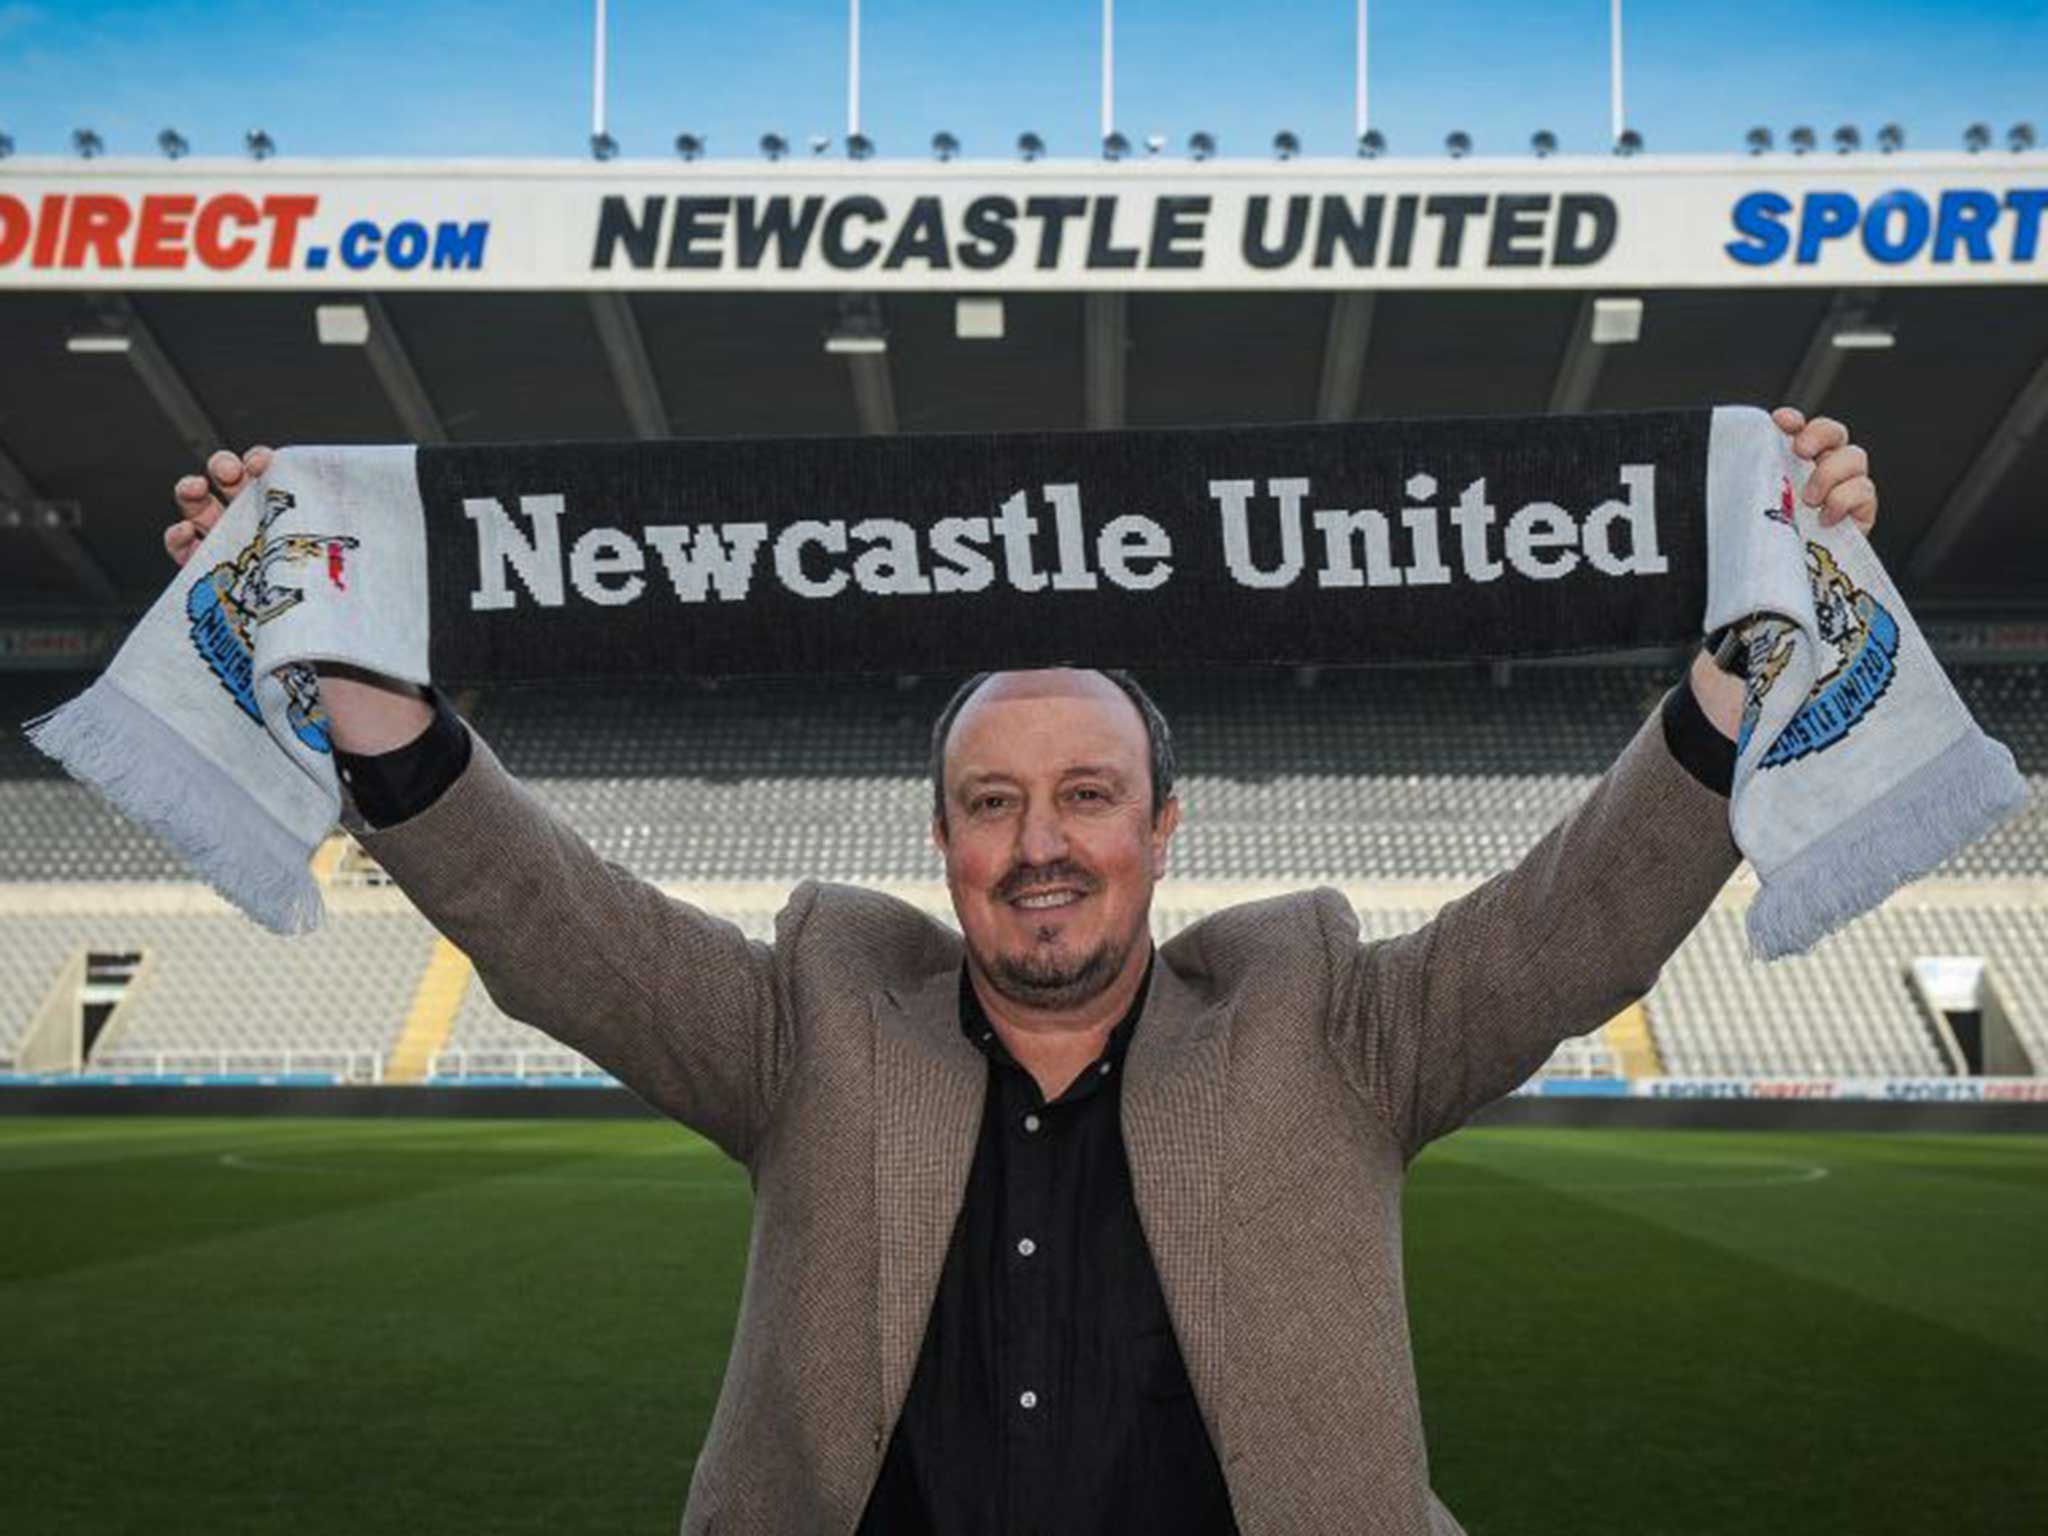 Rafael Benitez signs as Newcastle United's new manager